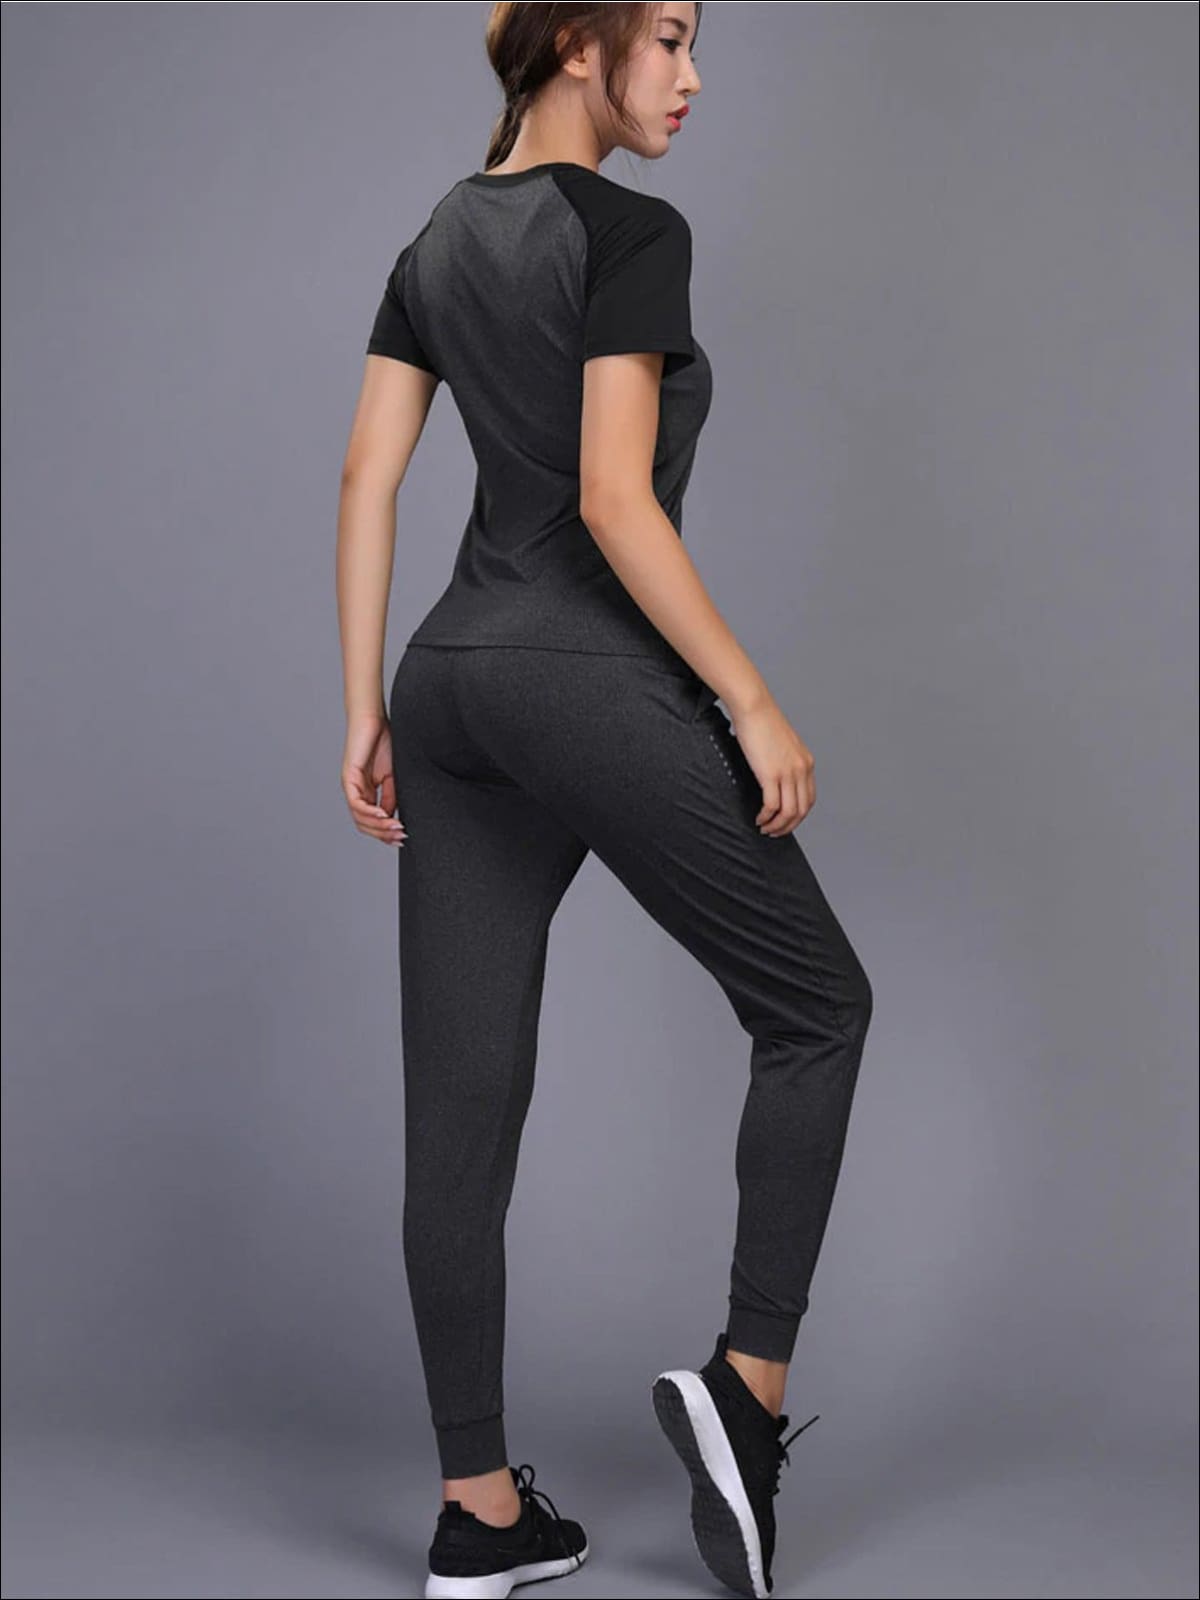 https://www.miabellebaby.com/cdn/shop/products/womens-workout-top-jogger-pants-set-20-39-99-40-59-bfcutoff-dropified-dropshipping-activewear-mia-belle-overseas-fulfillment-baby_412_1400x.jpg?v=1577276000